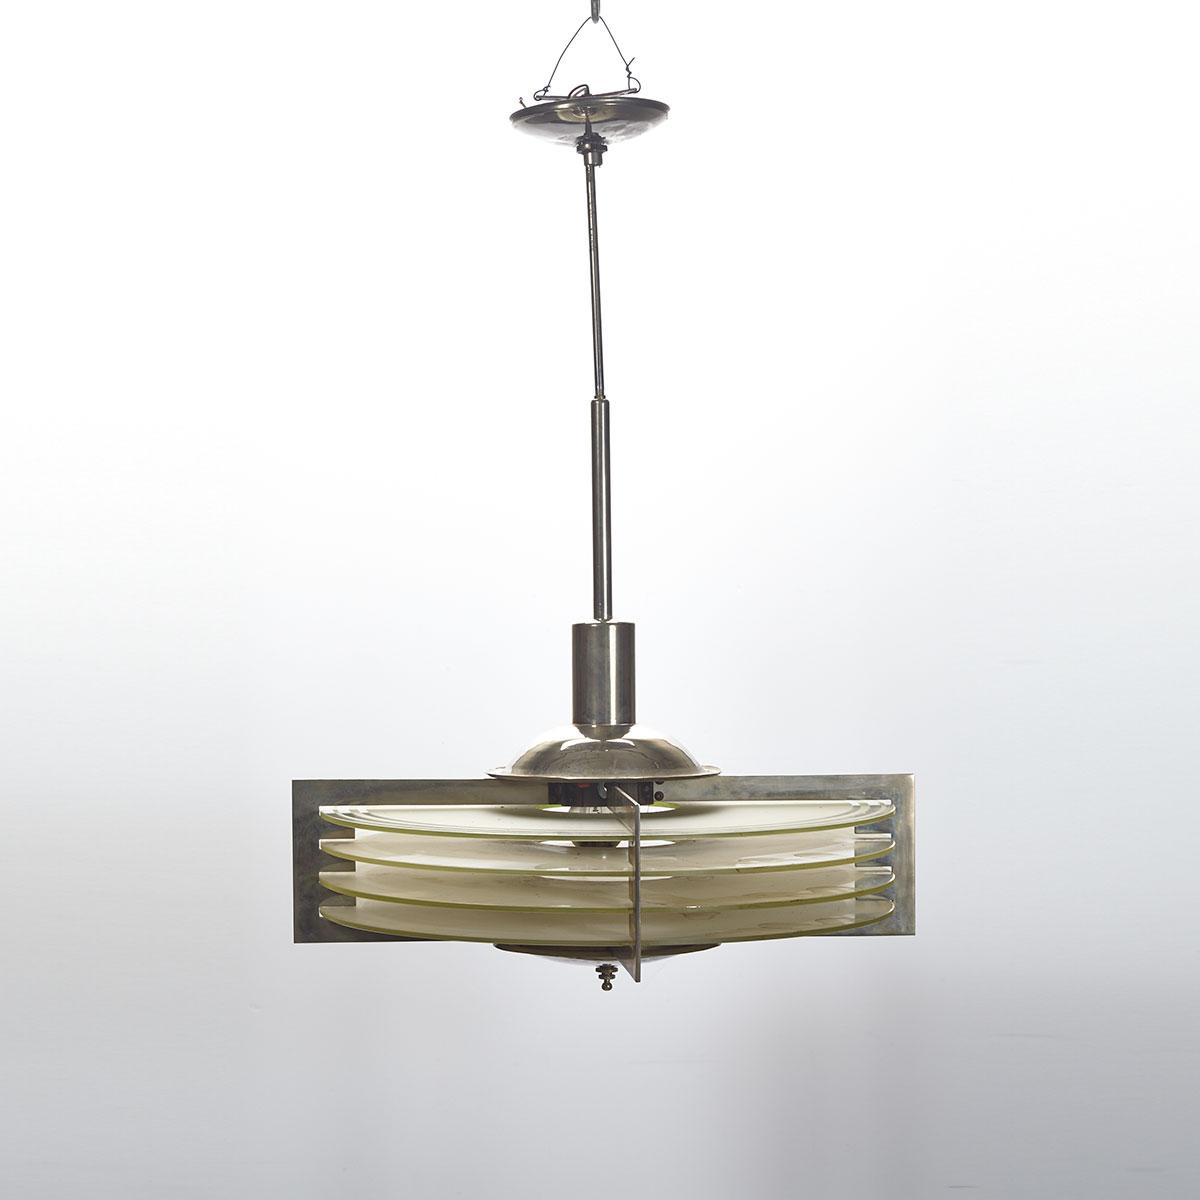 Art Deco Nickel and Etched Glass Chandelier, mid 20th century